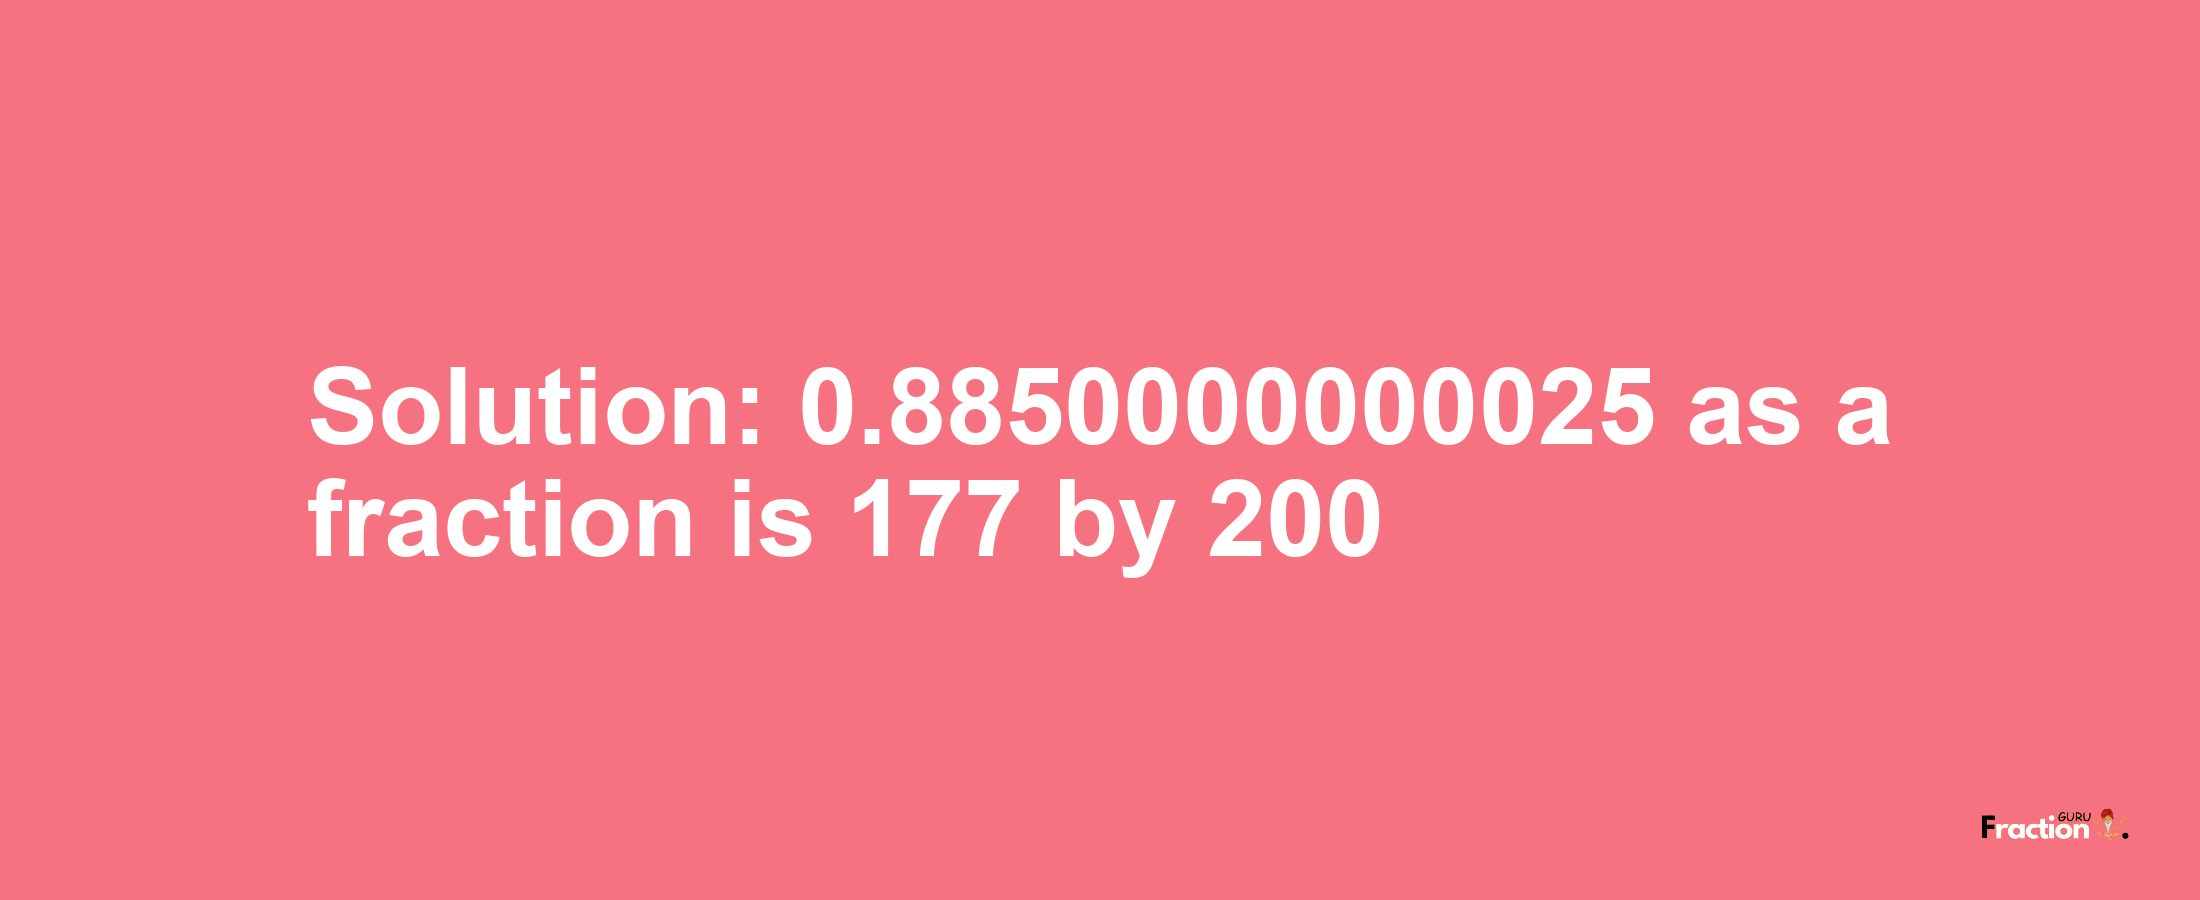 Solution:0.8850000000025 as a fraction is 177/200